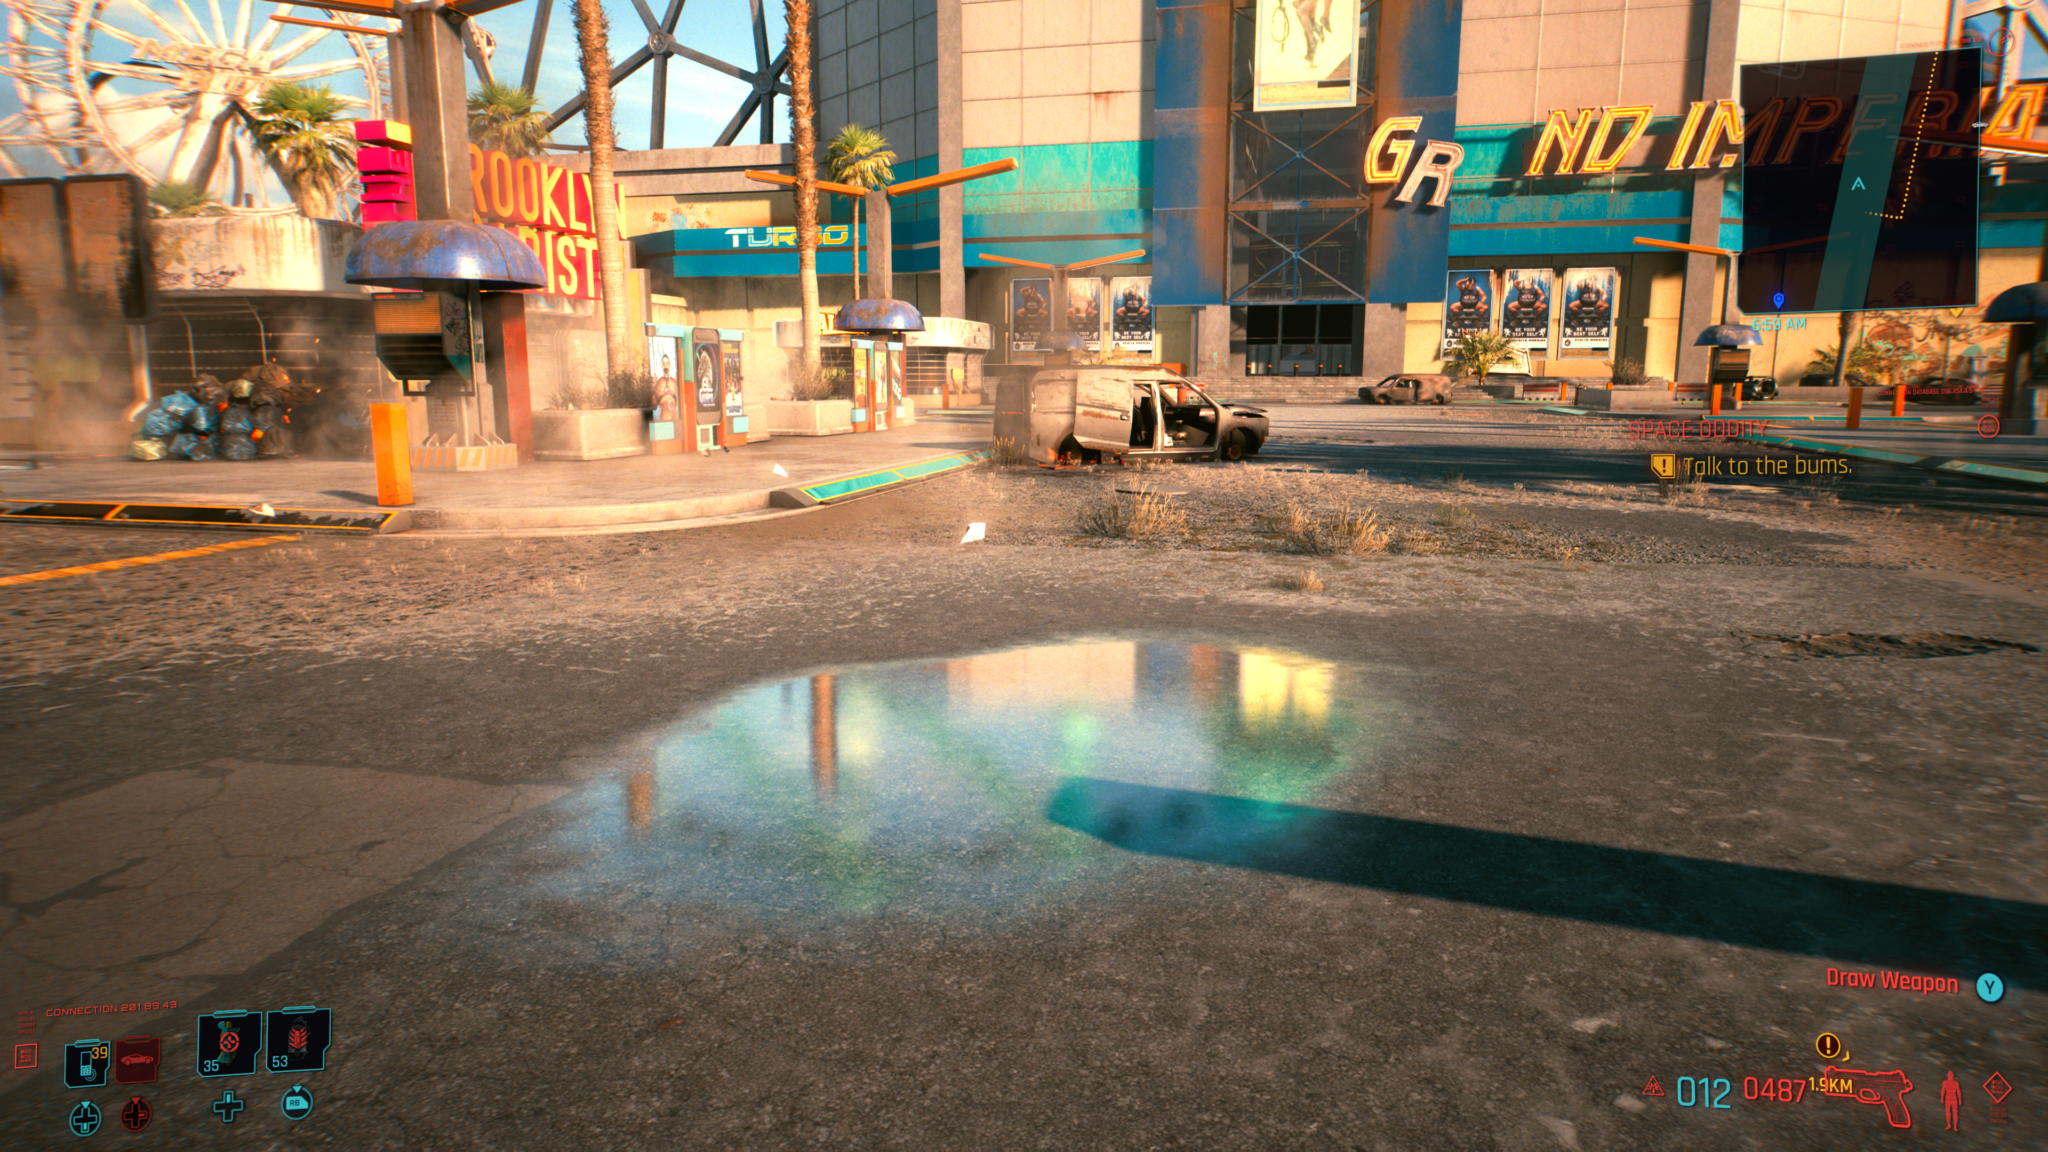 Cyberpunk 2077 (C) 2020 by CD Projekt RED Tag RTX Off Screen Space Reflection Psycho